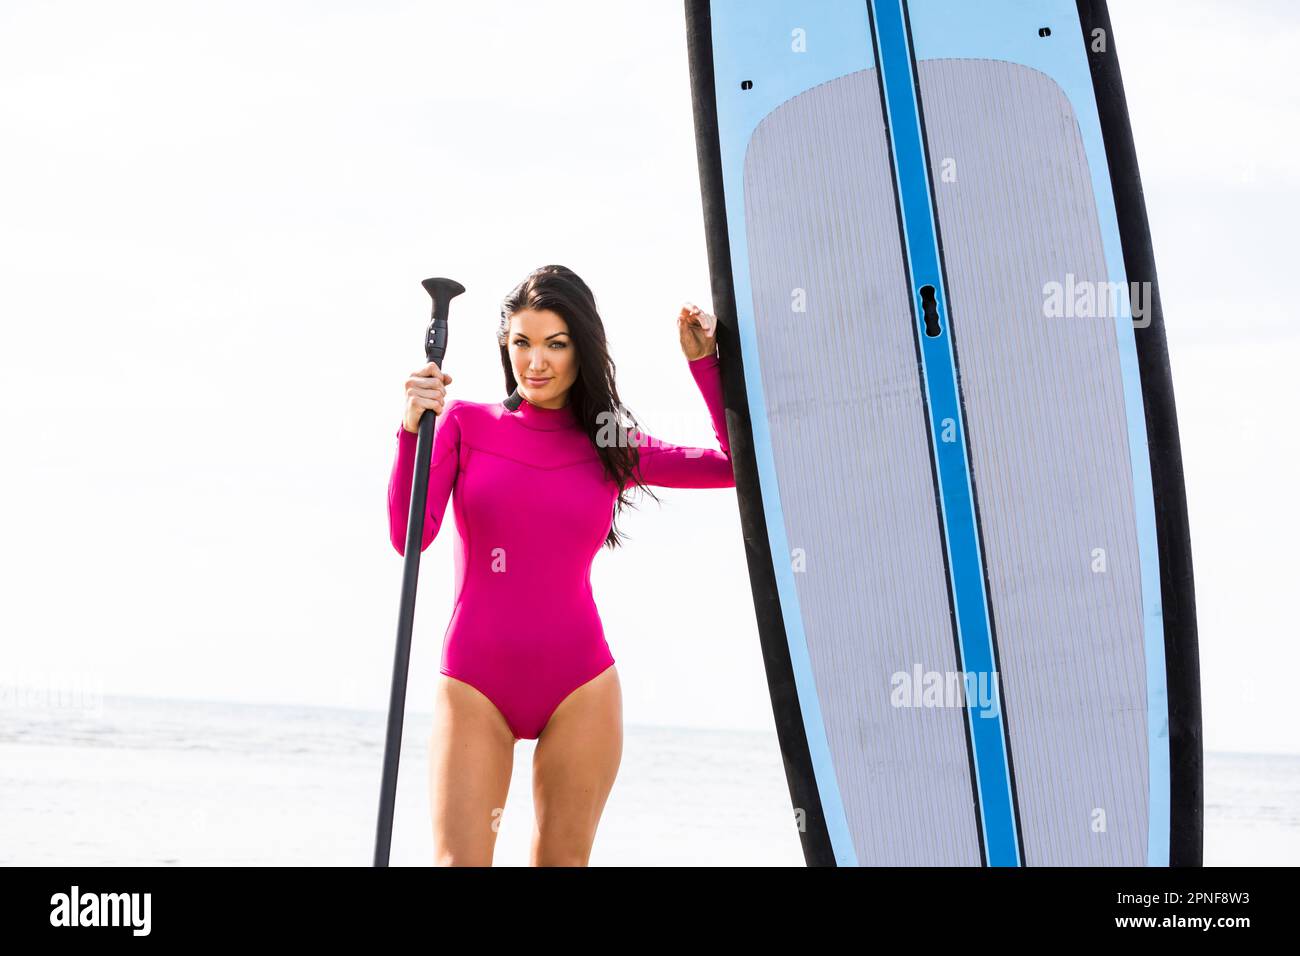 Woman standing next to paddleboard and holding oar Stock Photo